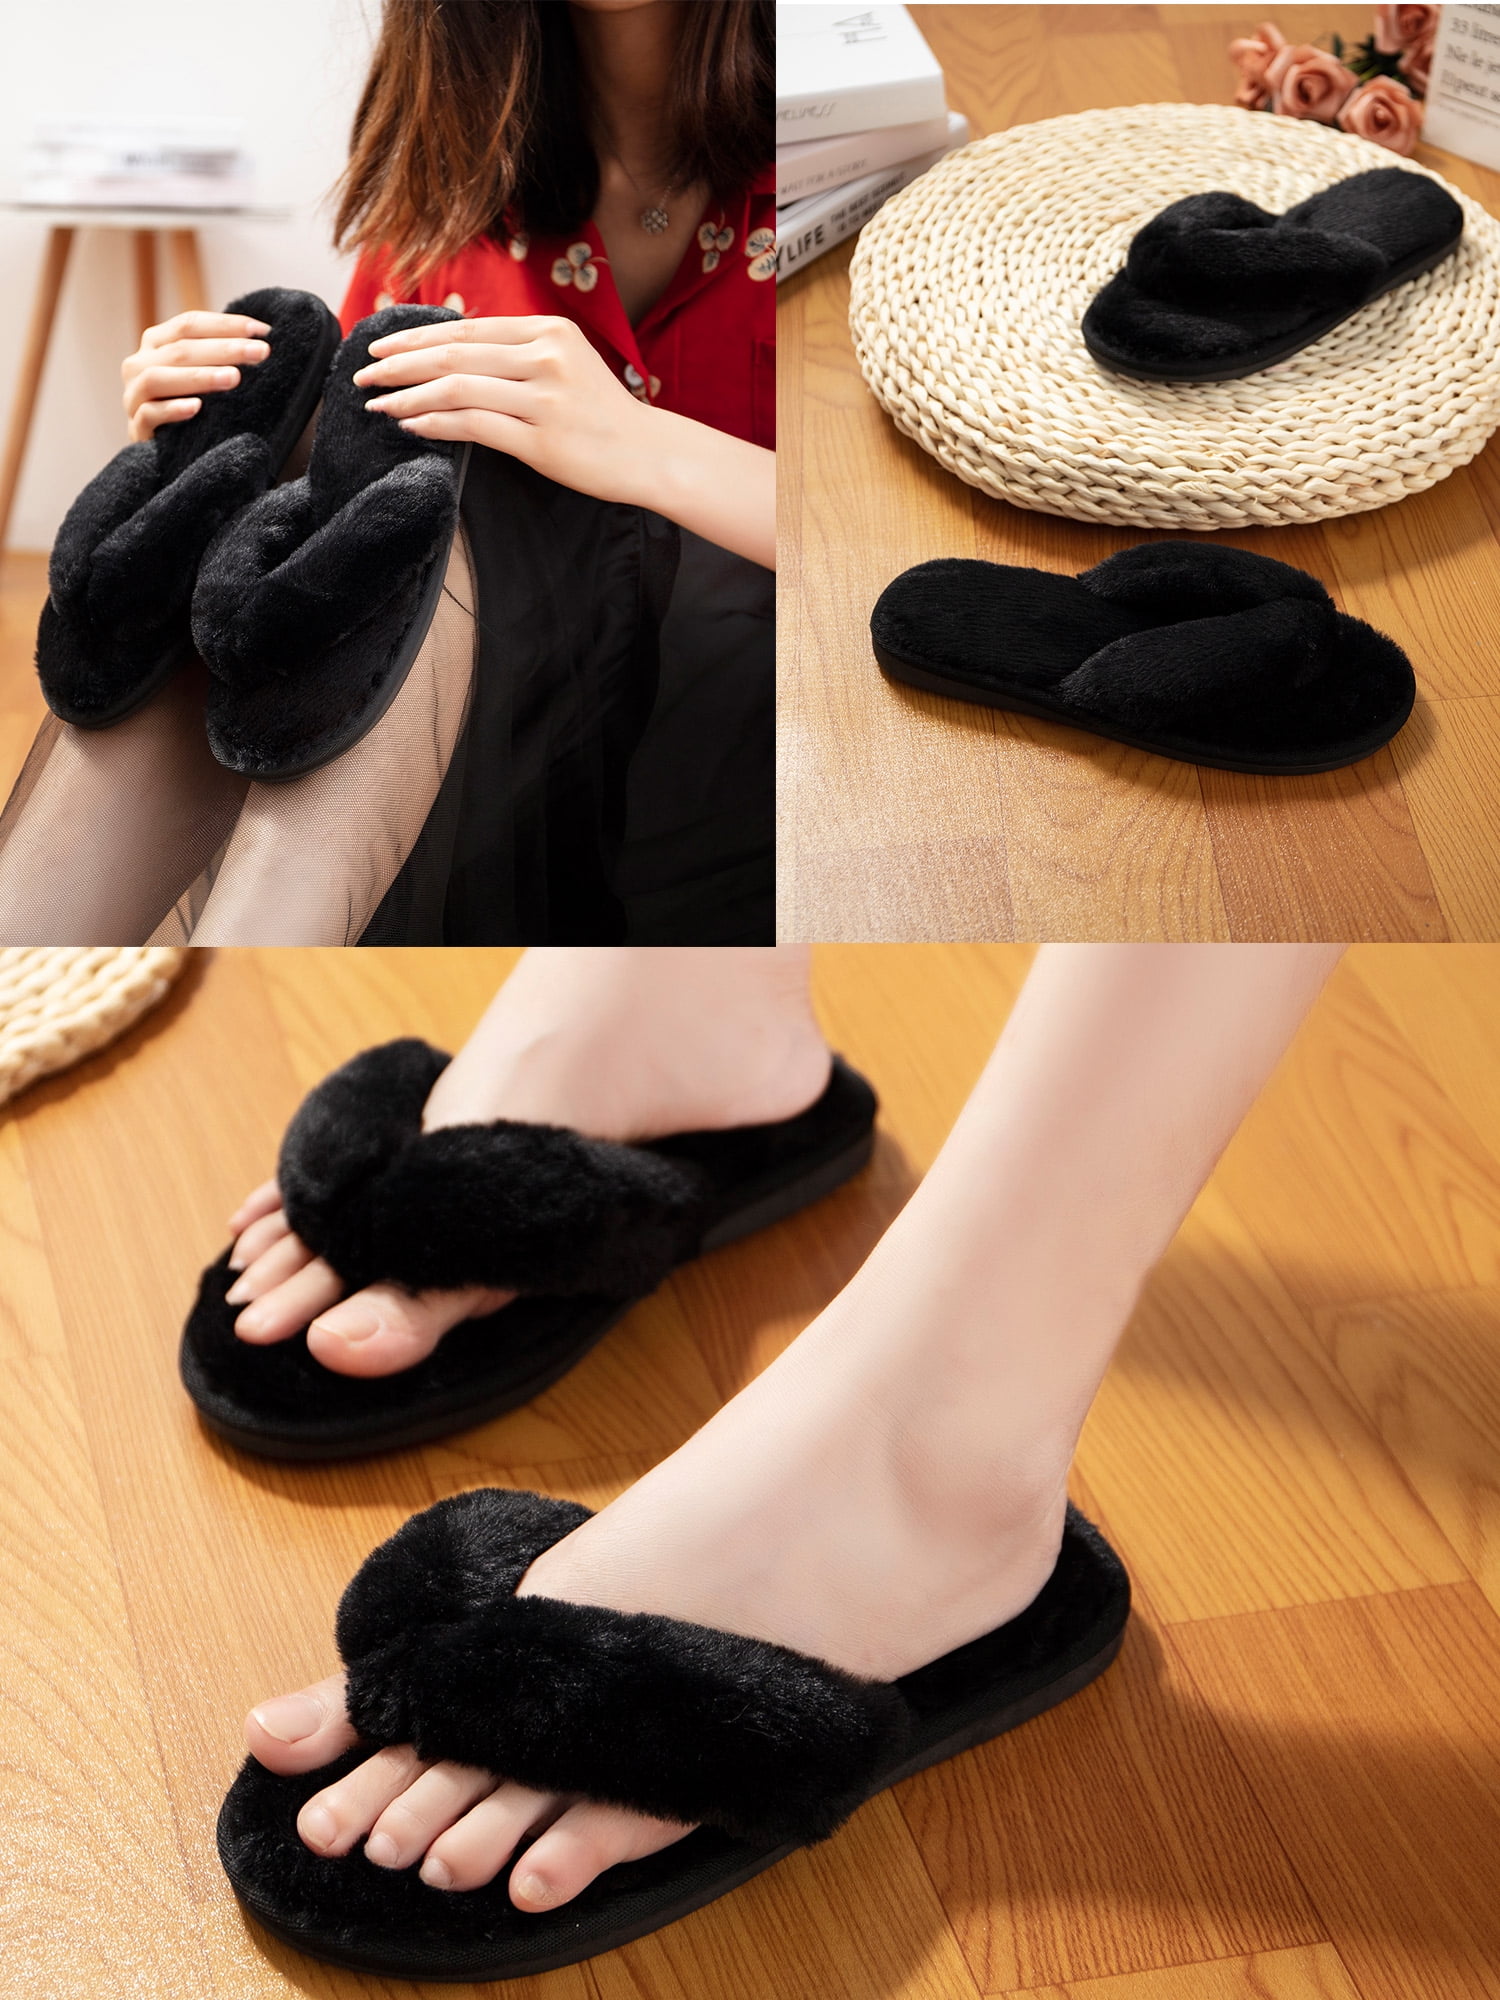 Rakkiss Womens Cozy Plush Warm Cute Indoor Home Slippers Winter Comfortable Soft Sole Floor Slippers Shoes 